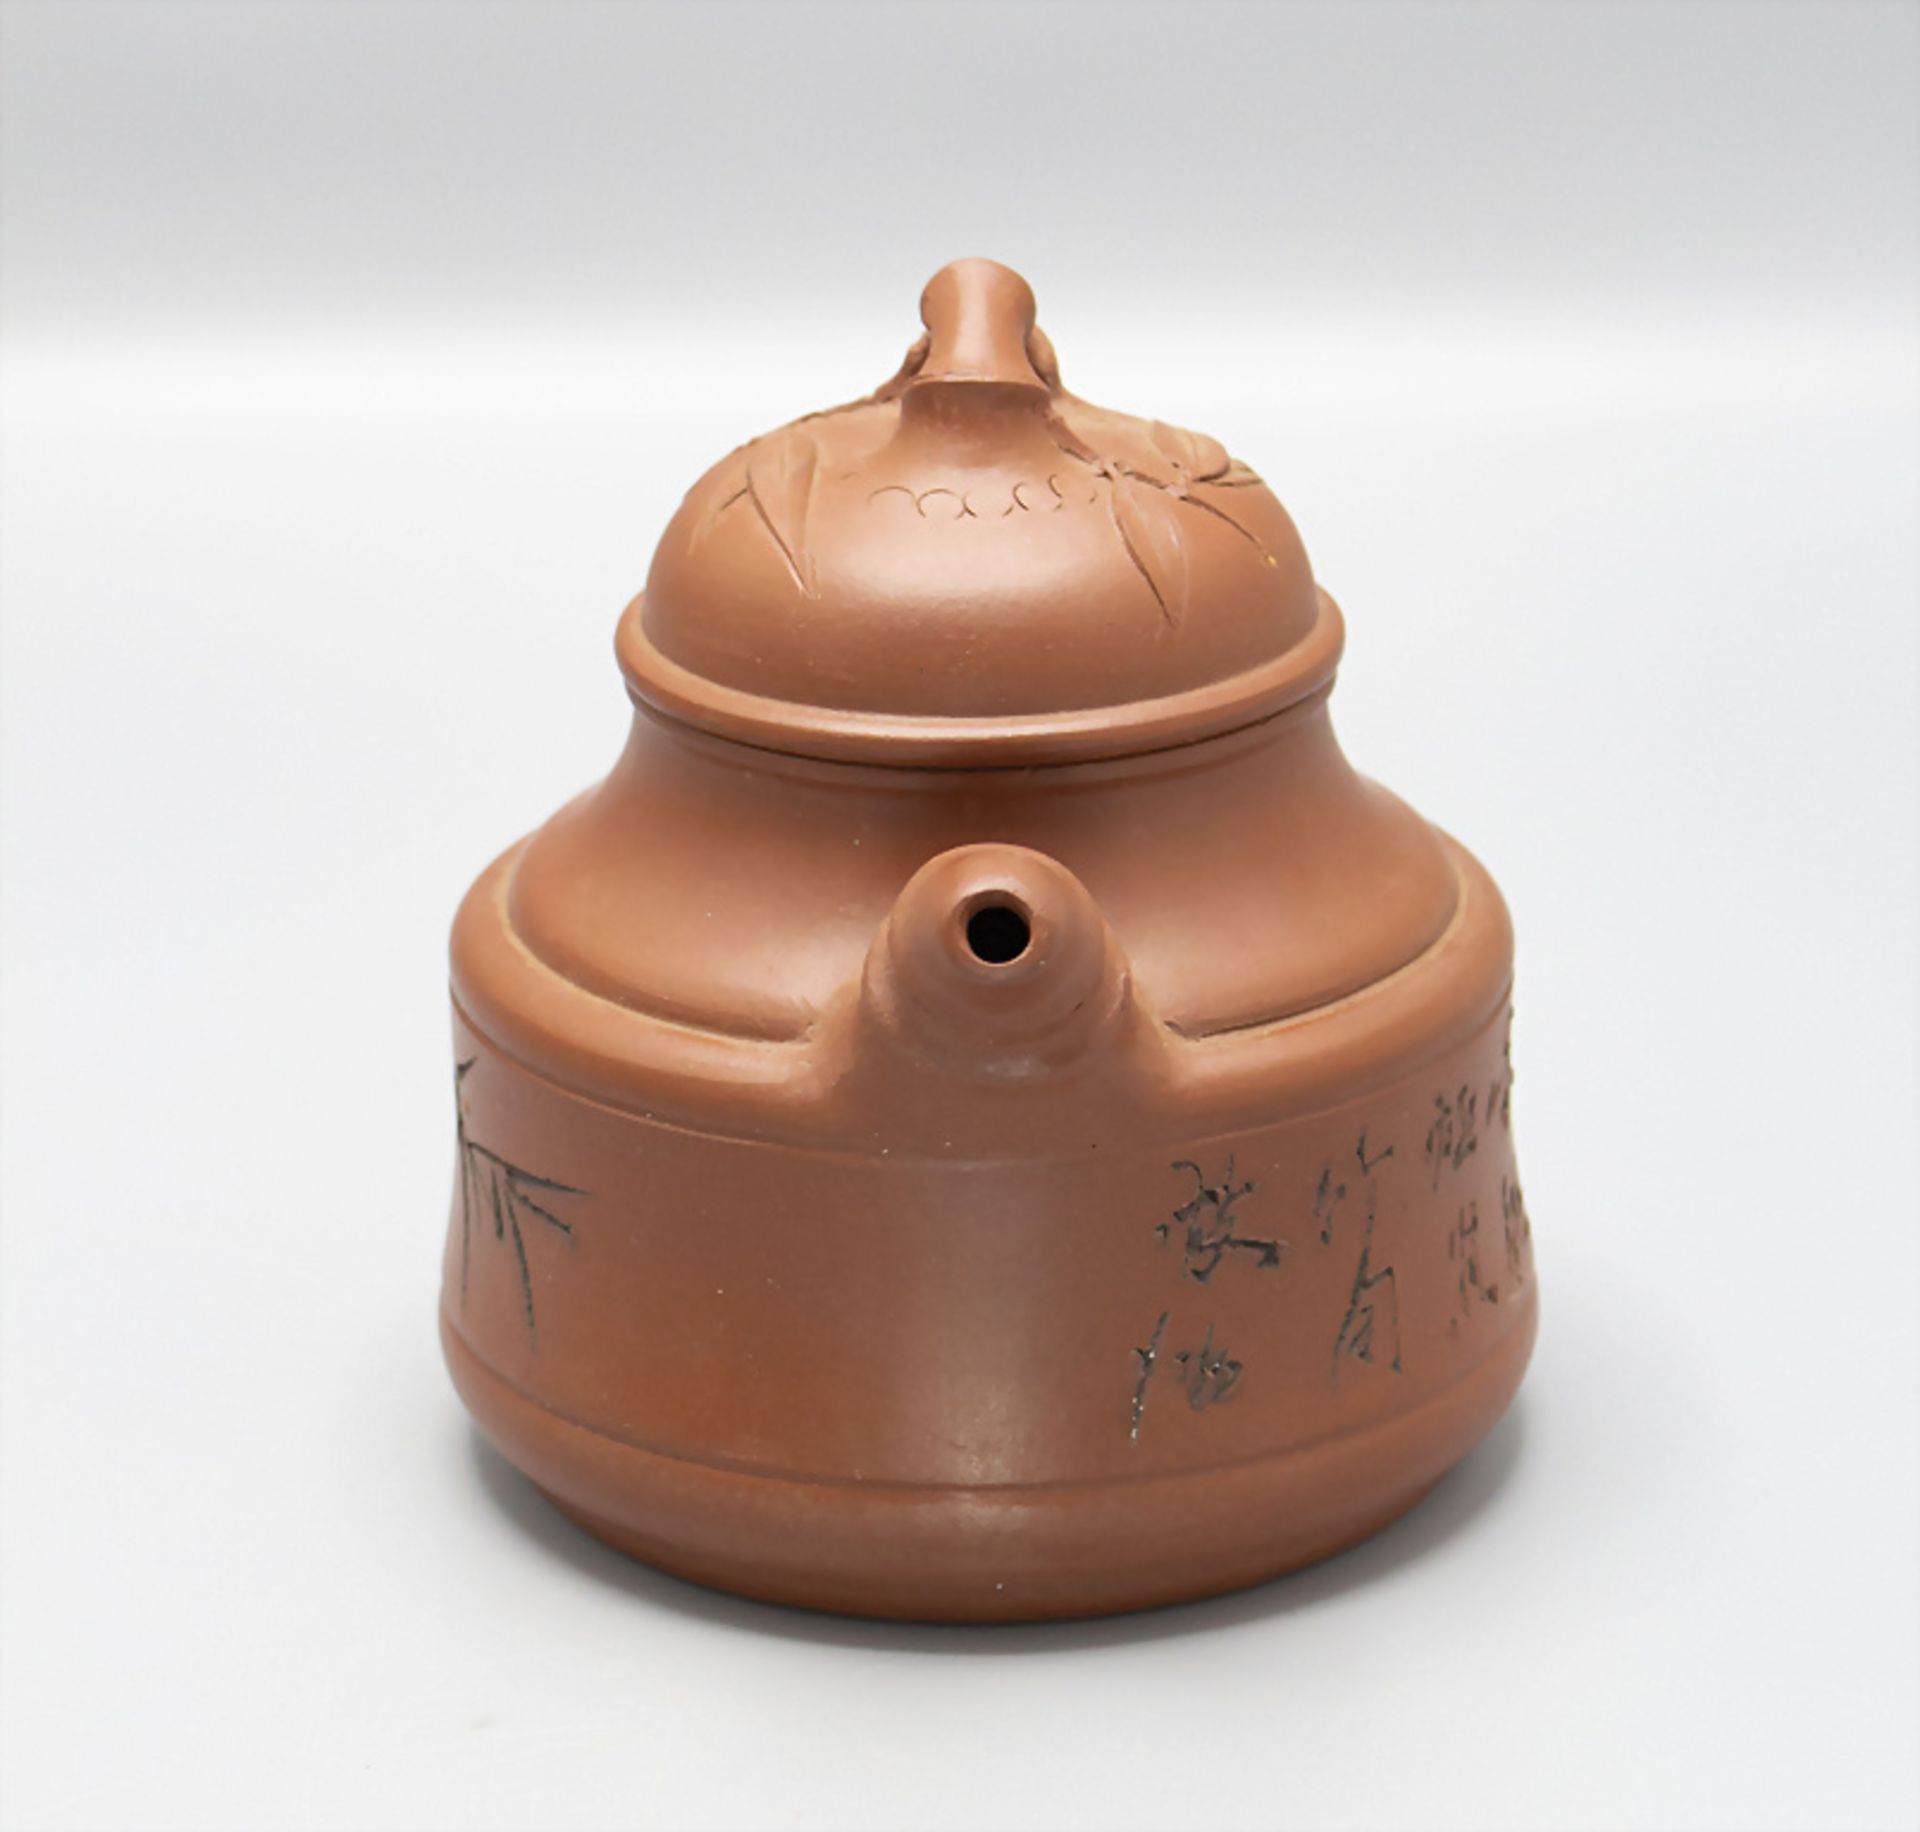 Bambus Teekanne mit Inschrift / A bamboo teapot with inscription, China, um 20. Jh. - Image 2 of 8